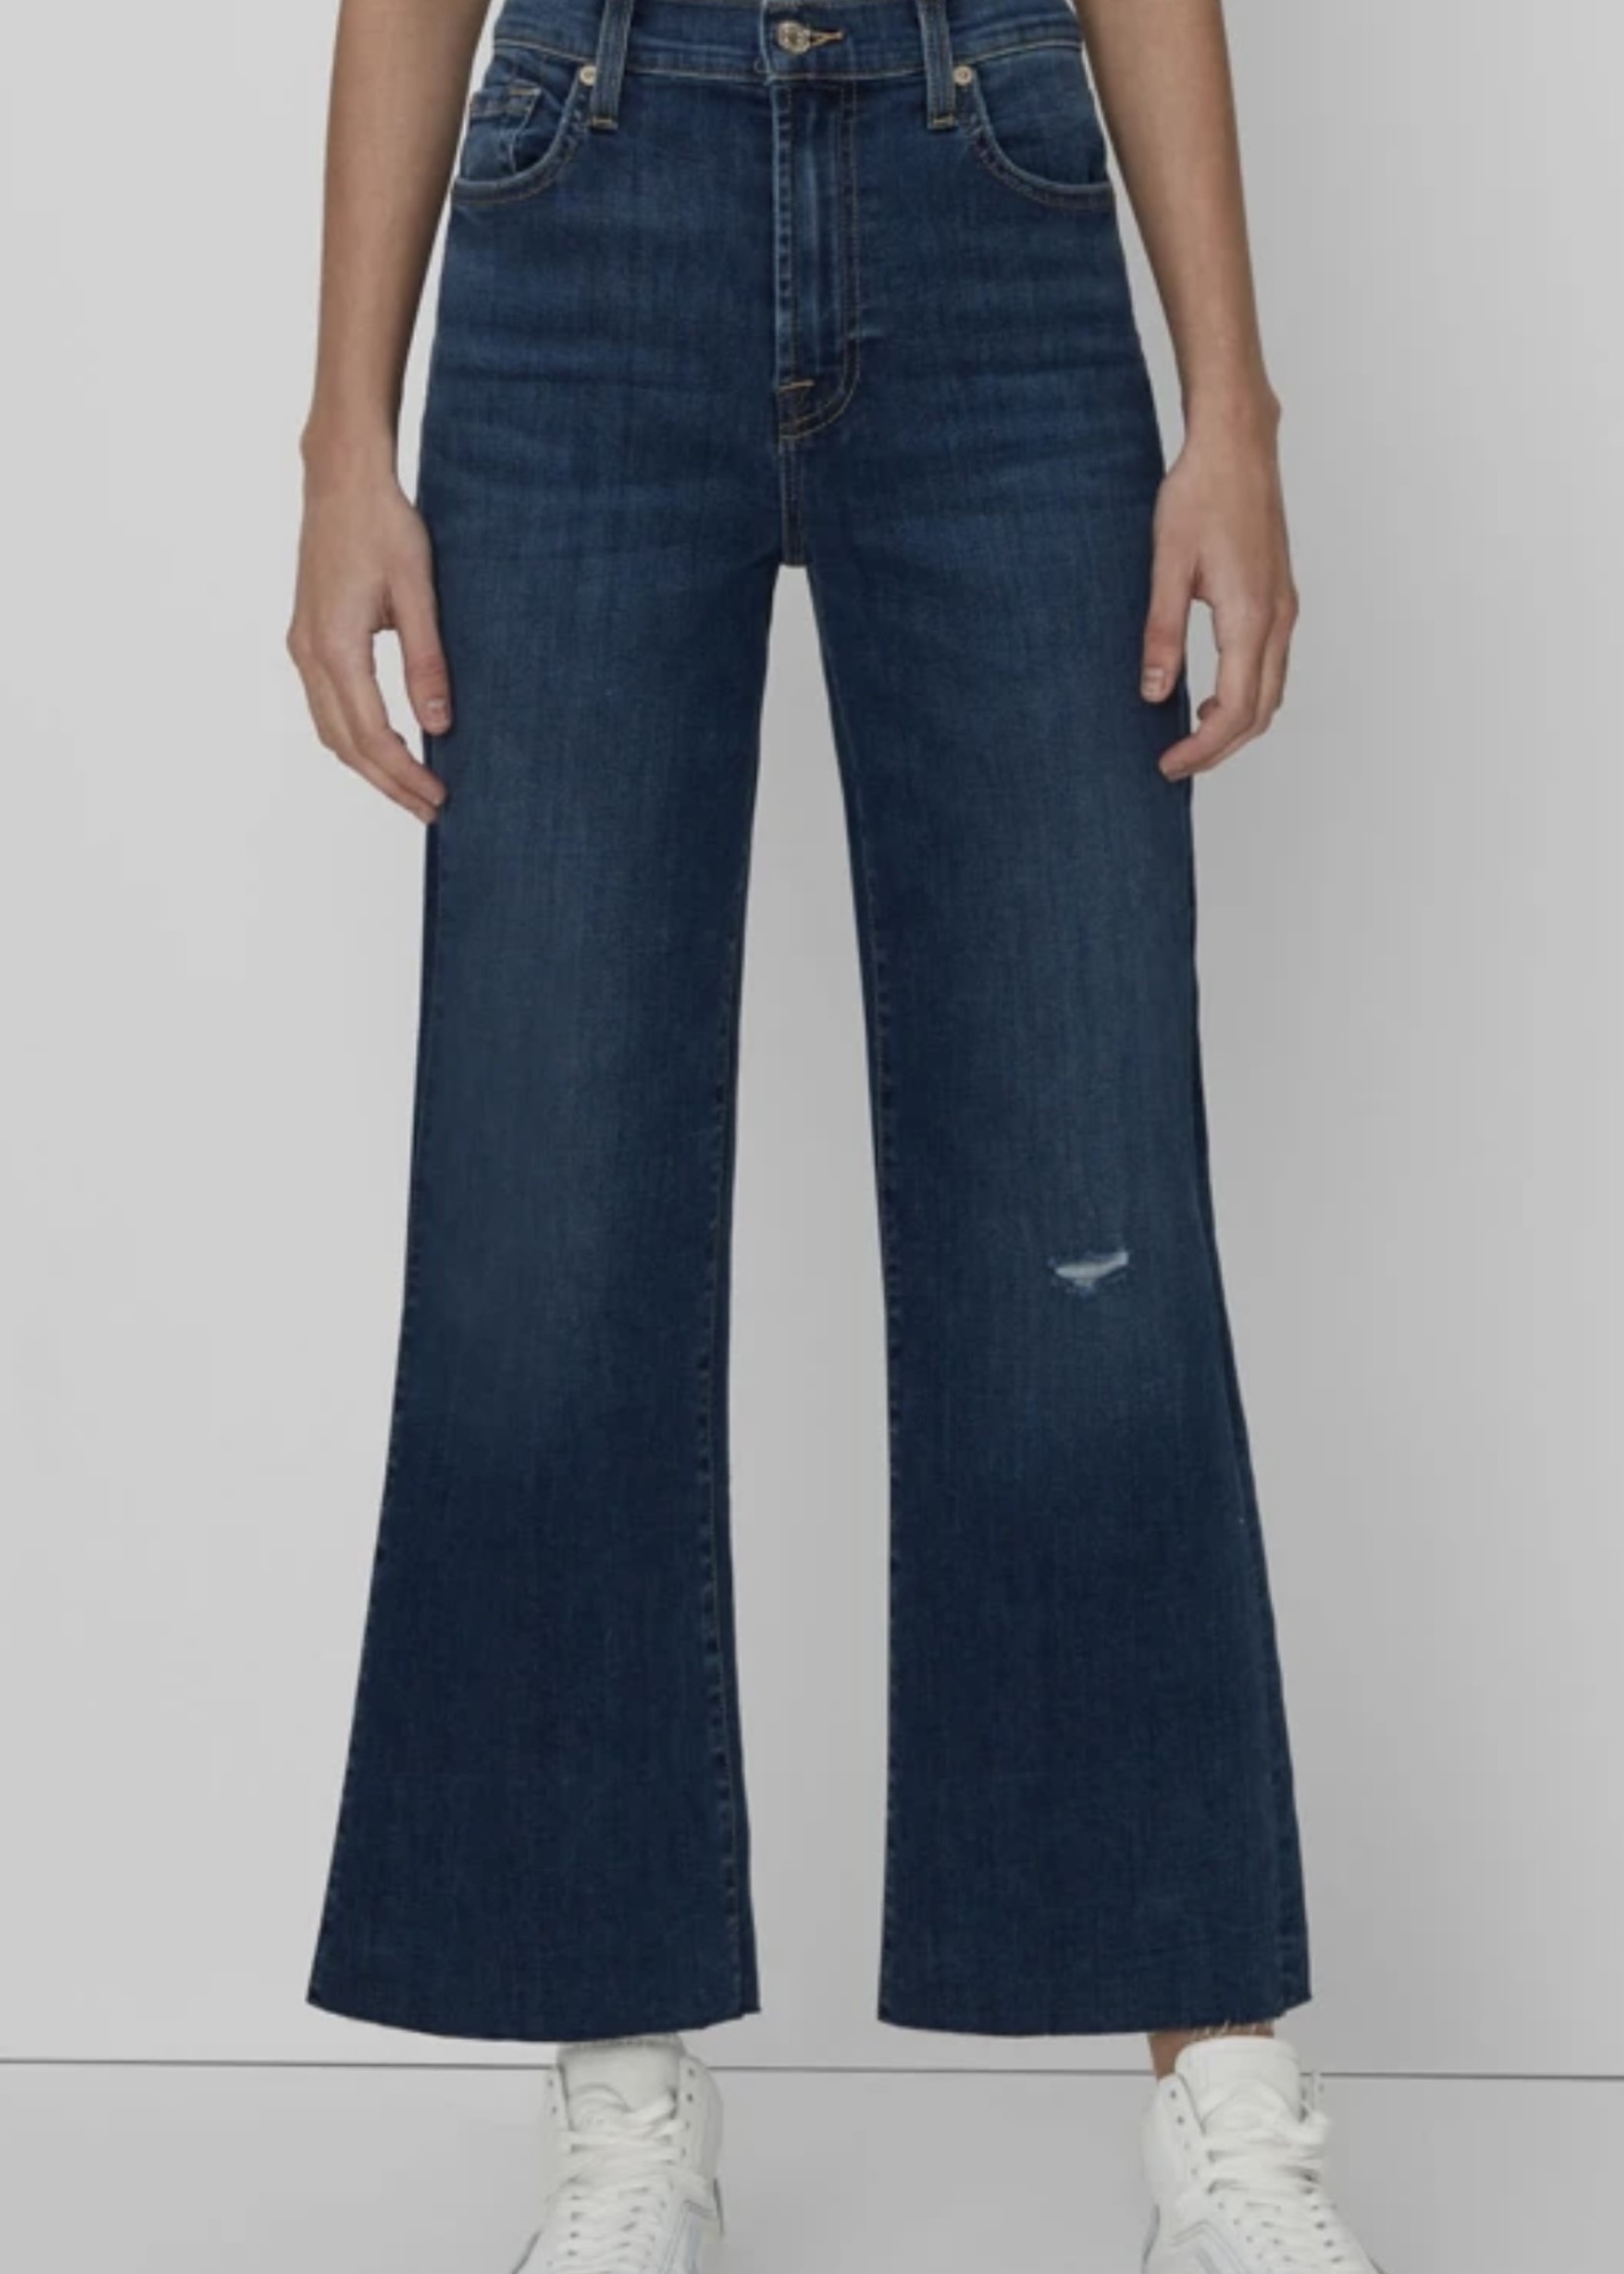 7 For All Mankind 7 For All Mankind Cropped Alexa